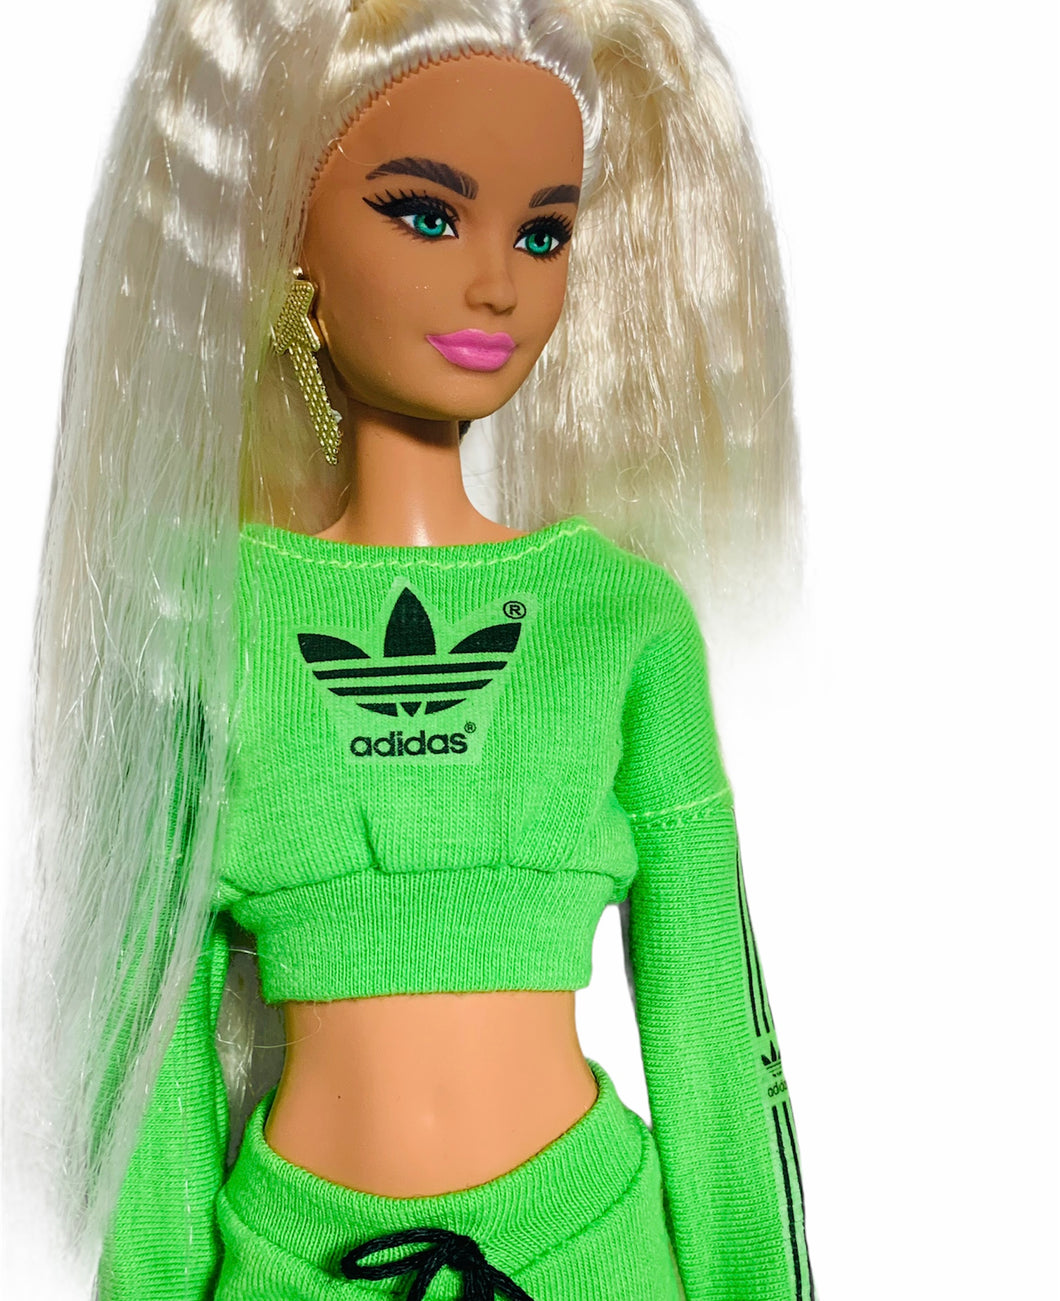 Lime green sports top for Barbie Doll